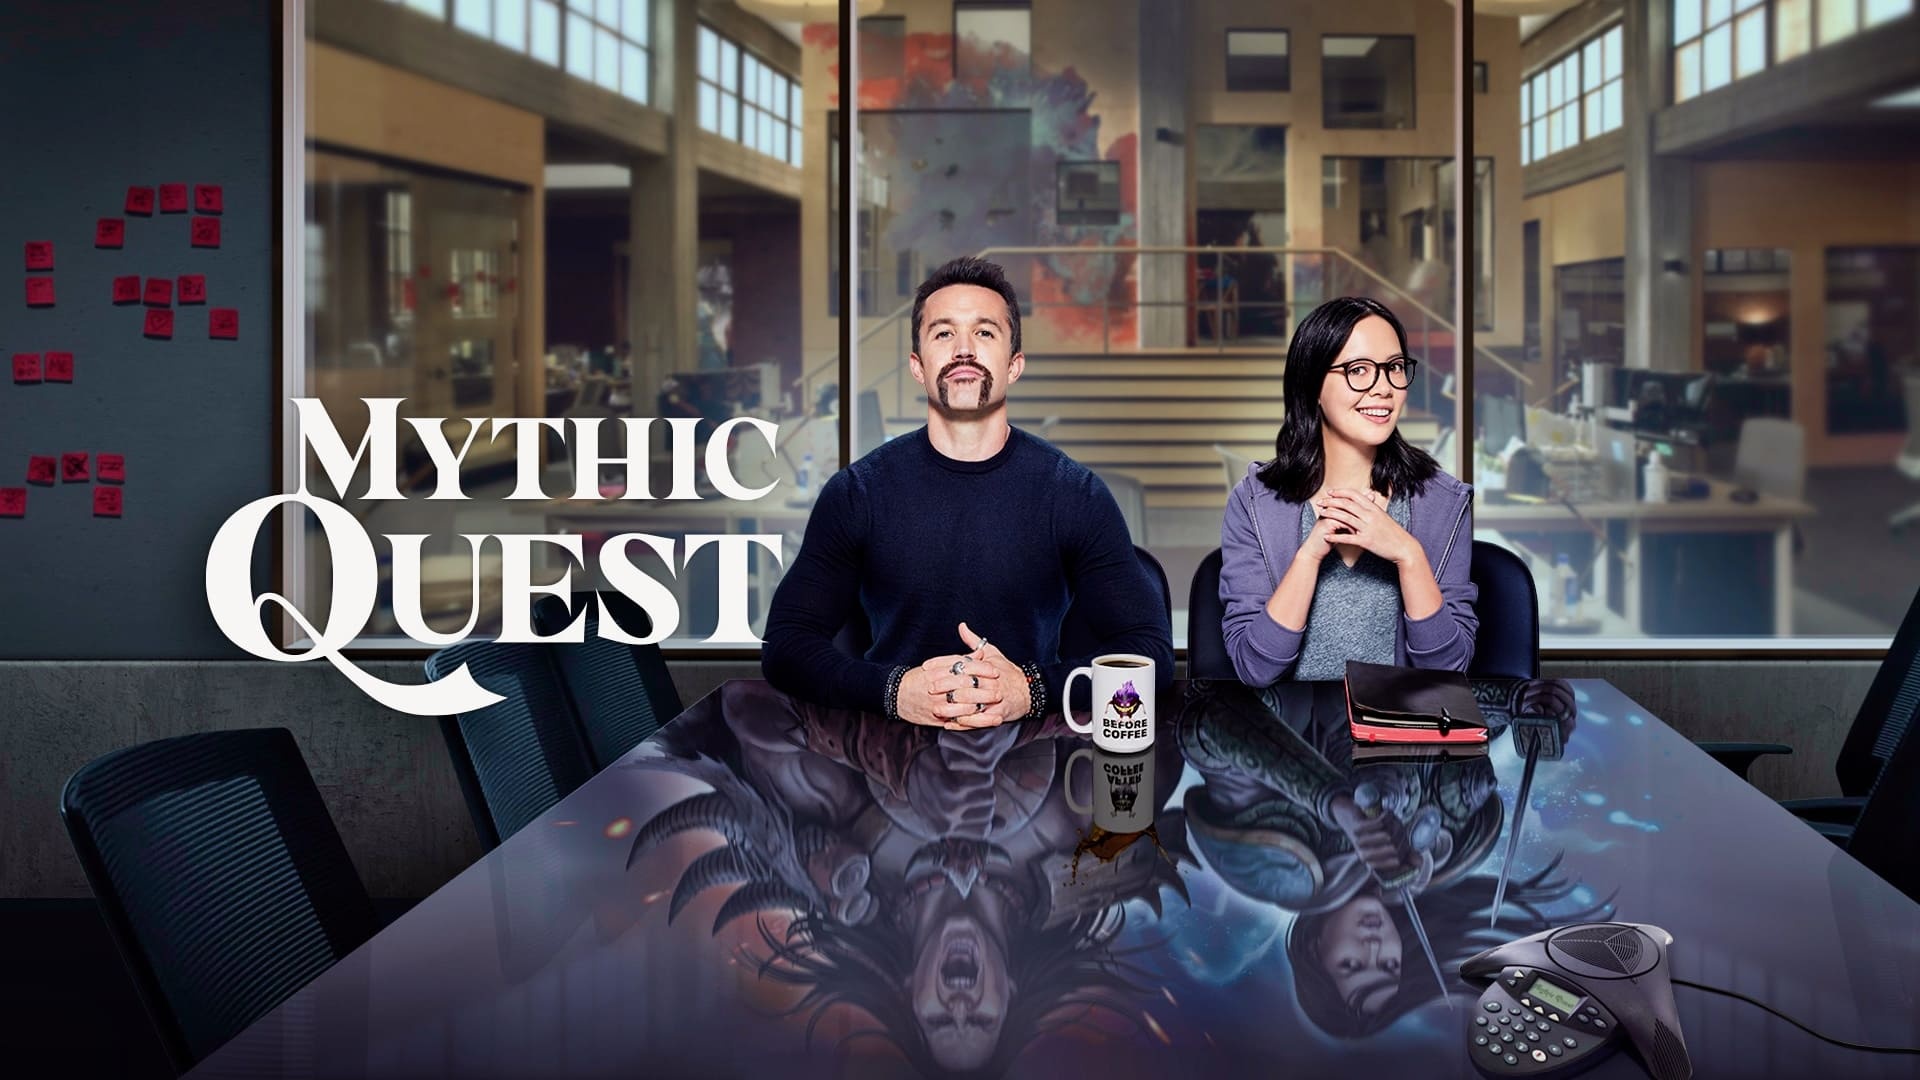 Mythic Quest: Raven's Banquet, Season 1 videos, Exhilarating gameplay, Comedy gold, 1920x1080 Full HD Desktop